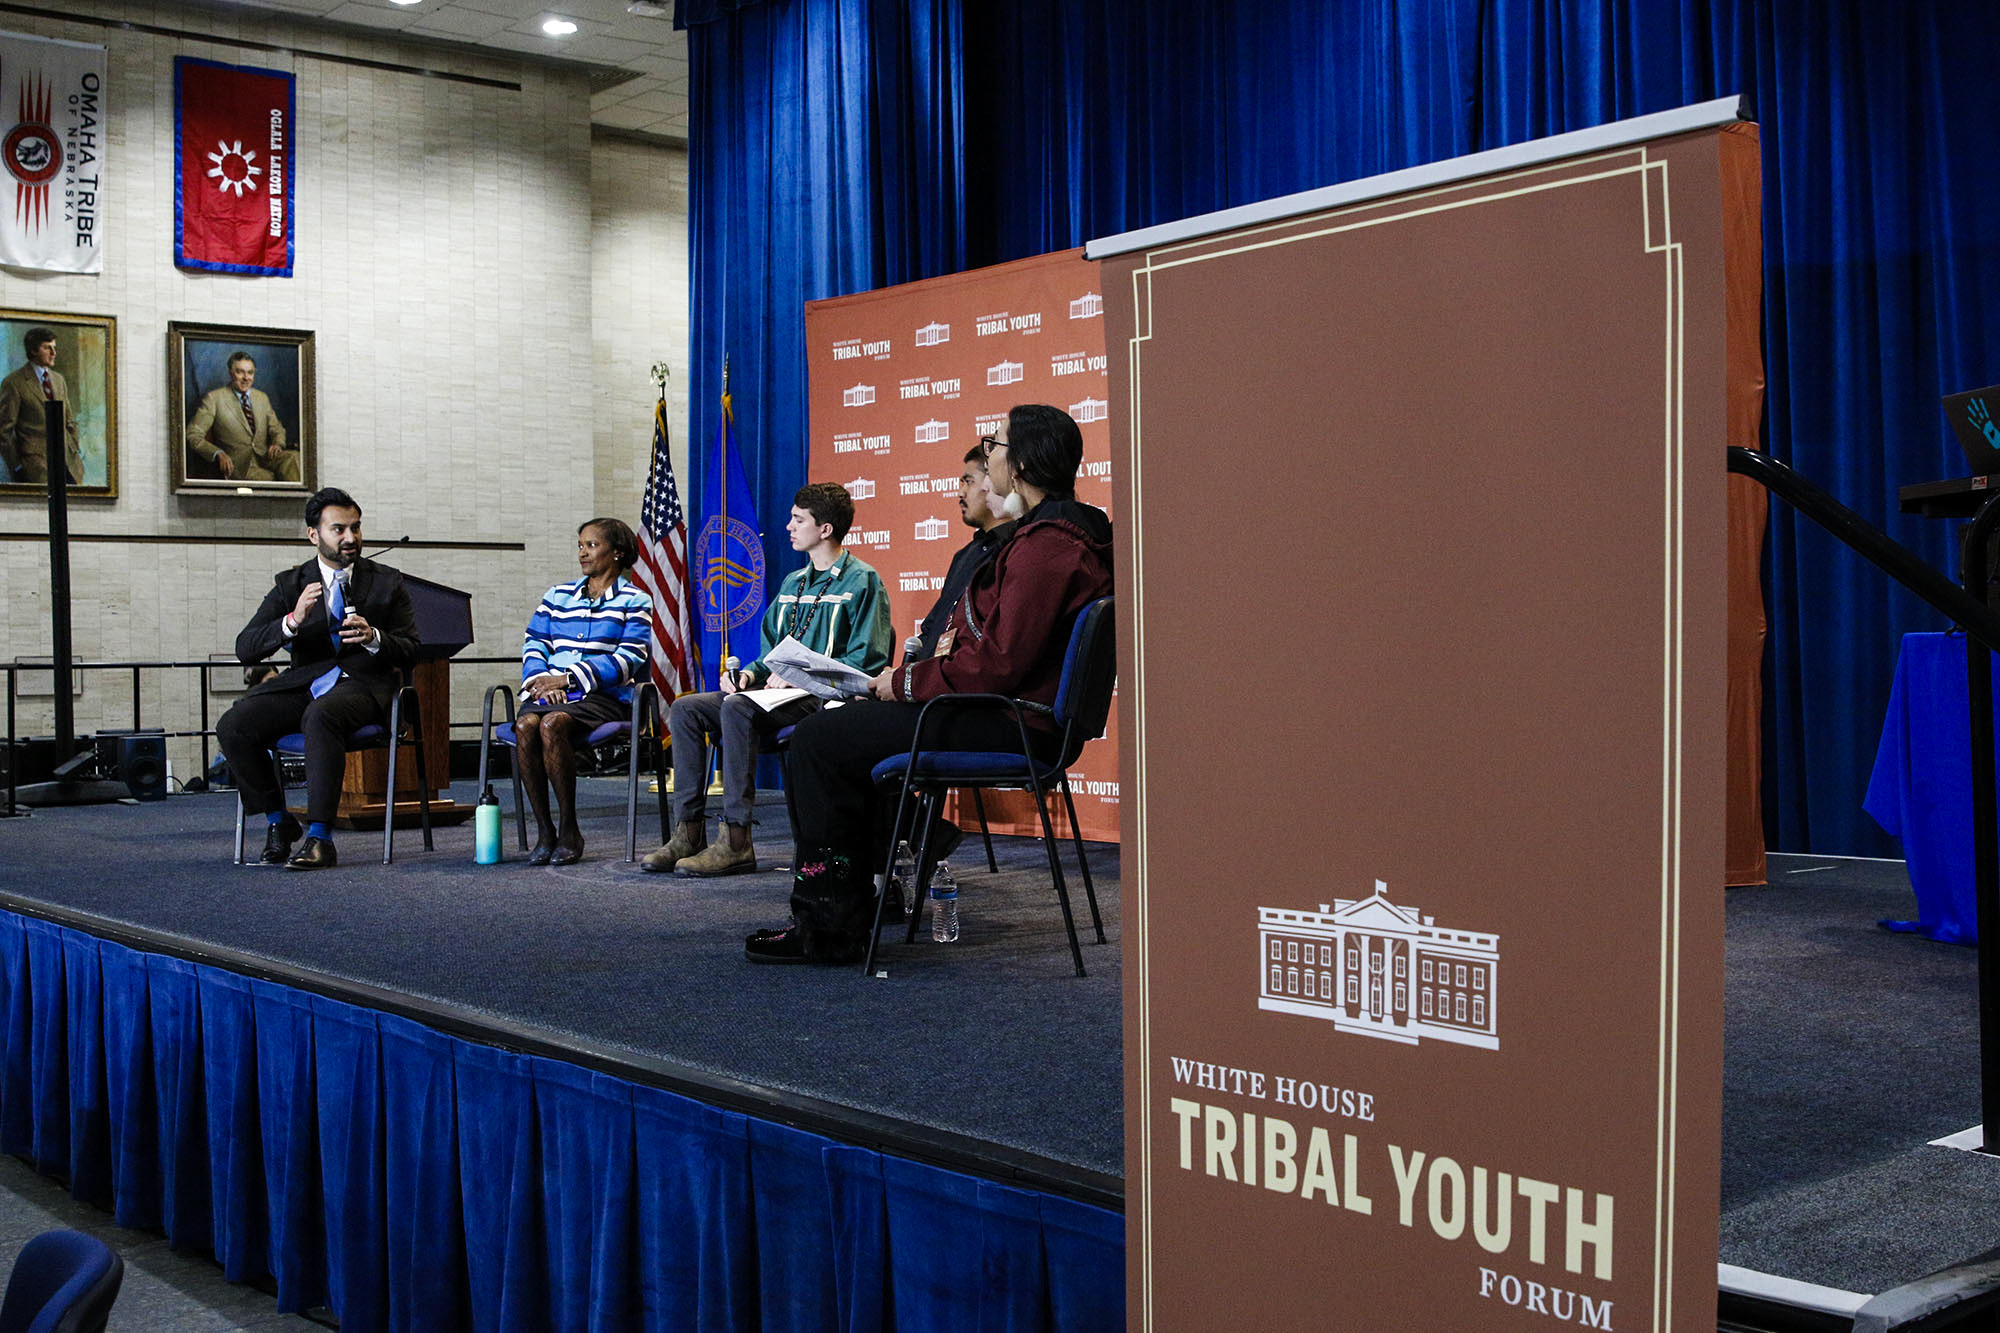 White House Tribal Youth Forum